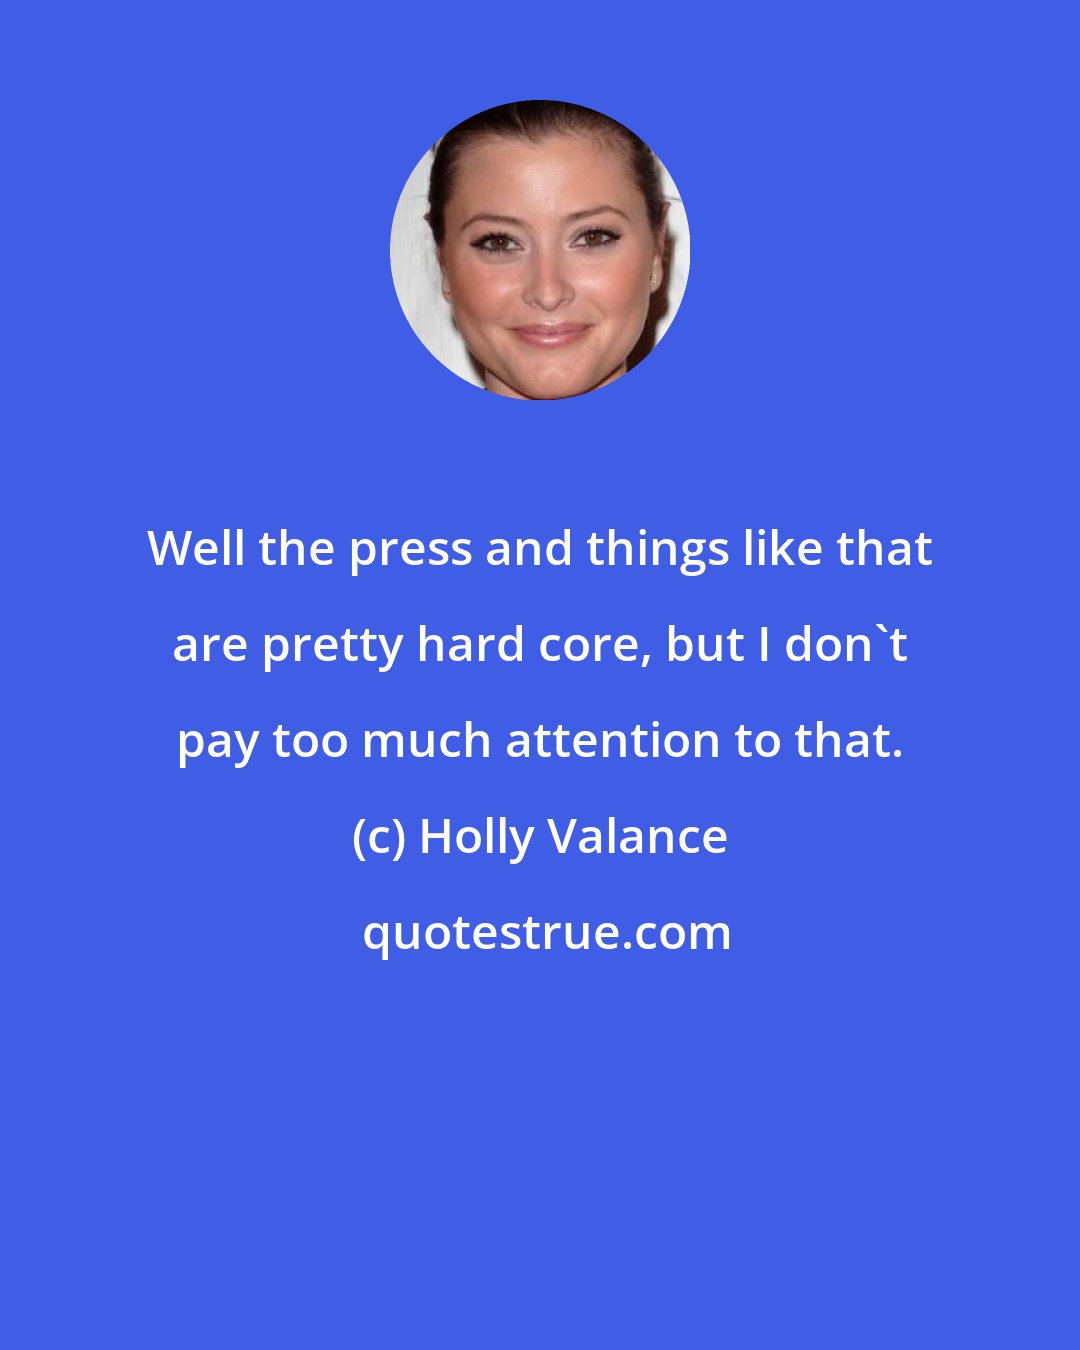 Holly Valance: Well the press and things like that are pretty hard core, but I don't pay too much attention to that.